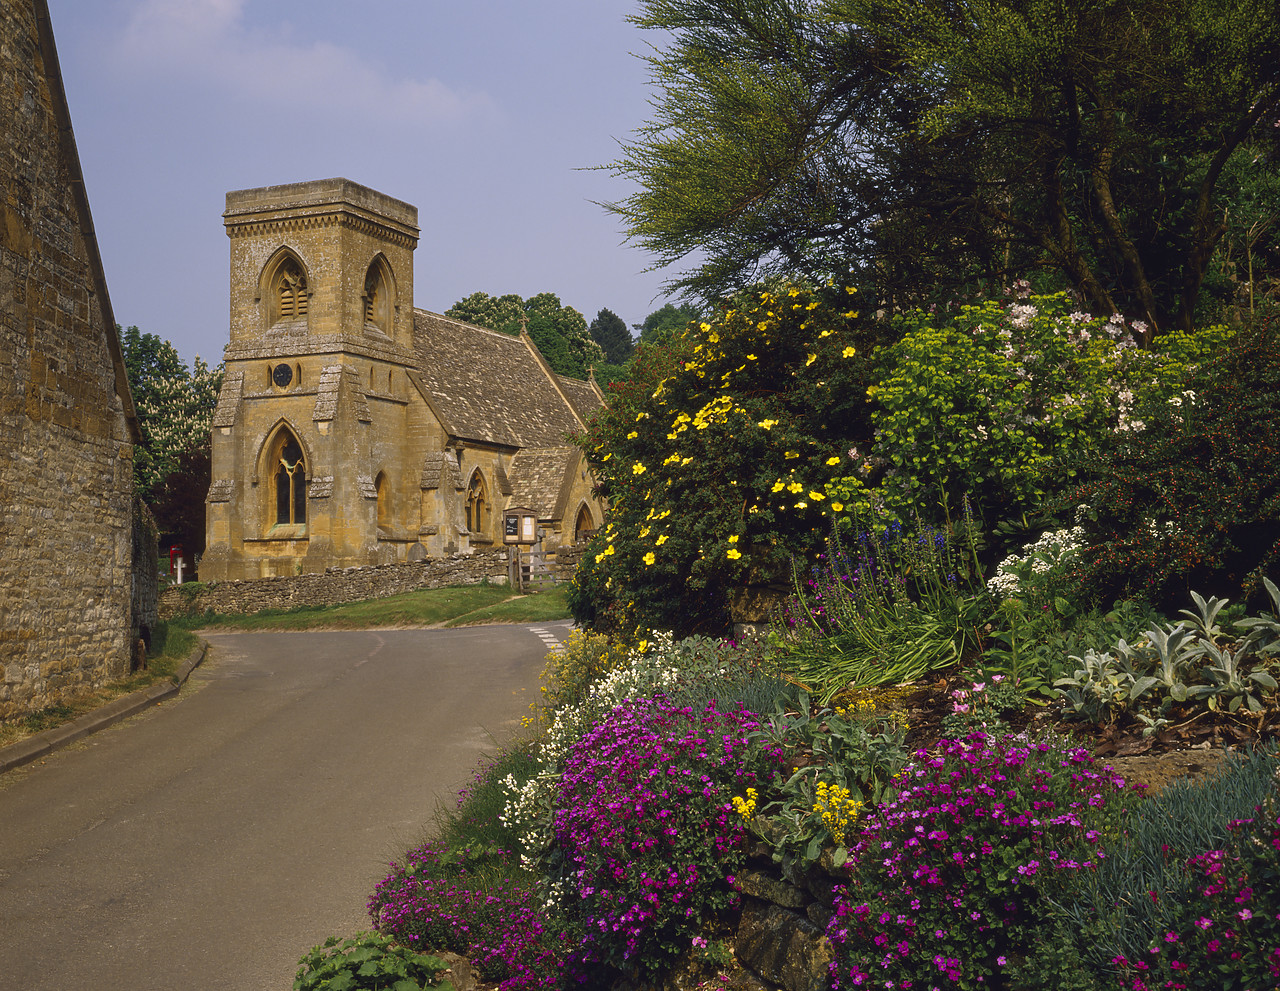 #924000-1 - Church at Snowshill, Gloucestershire, England